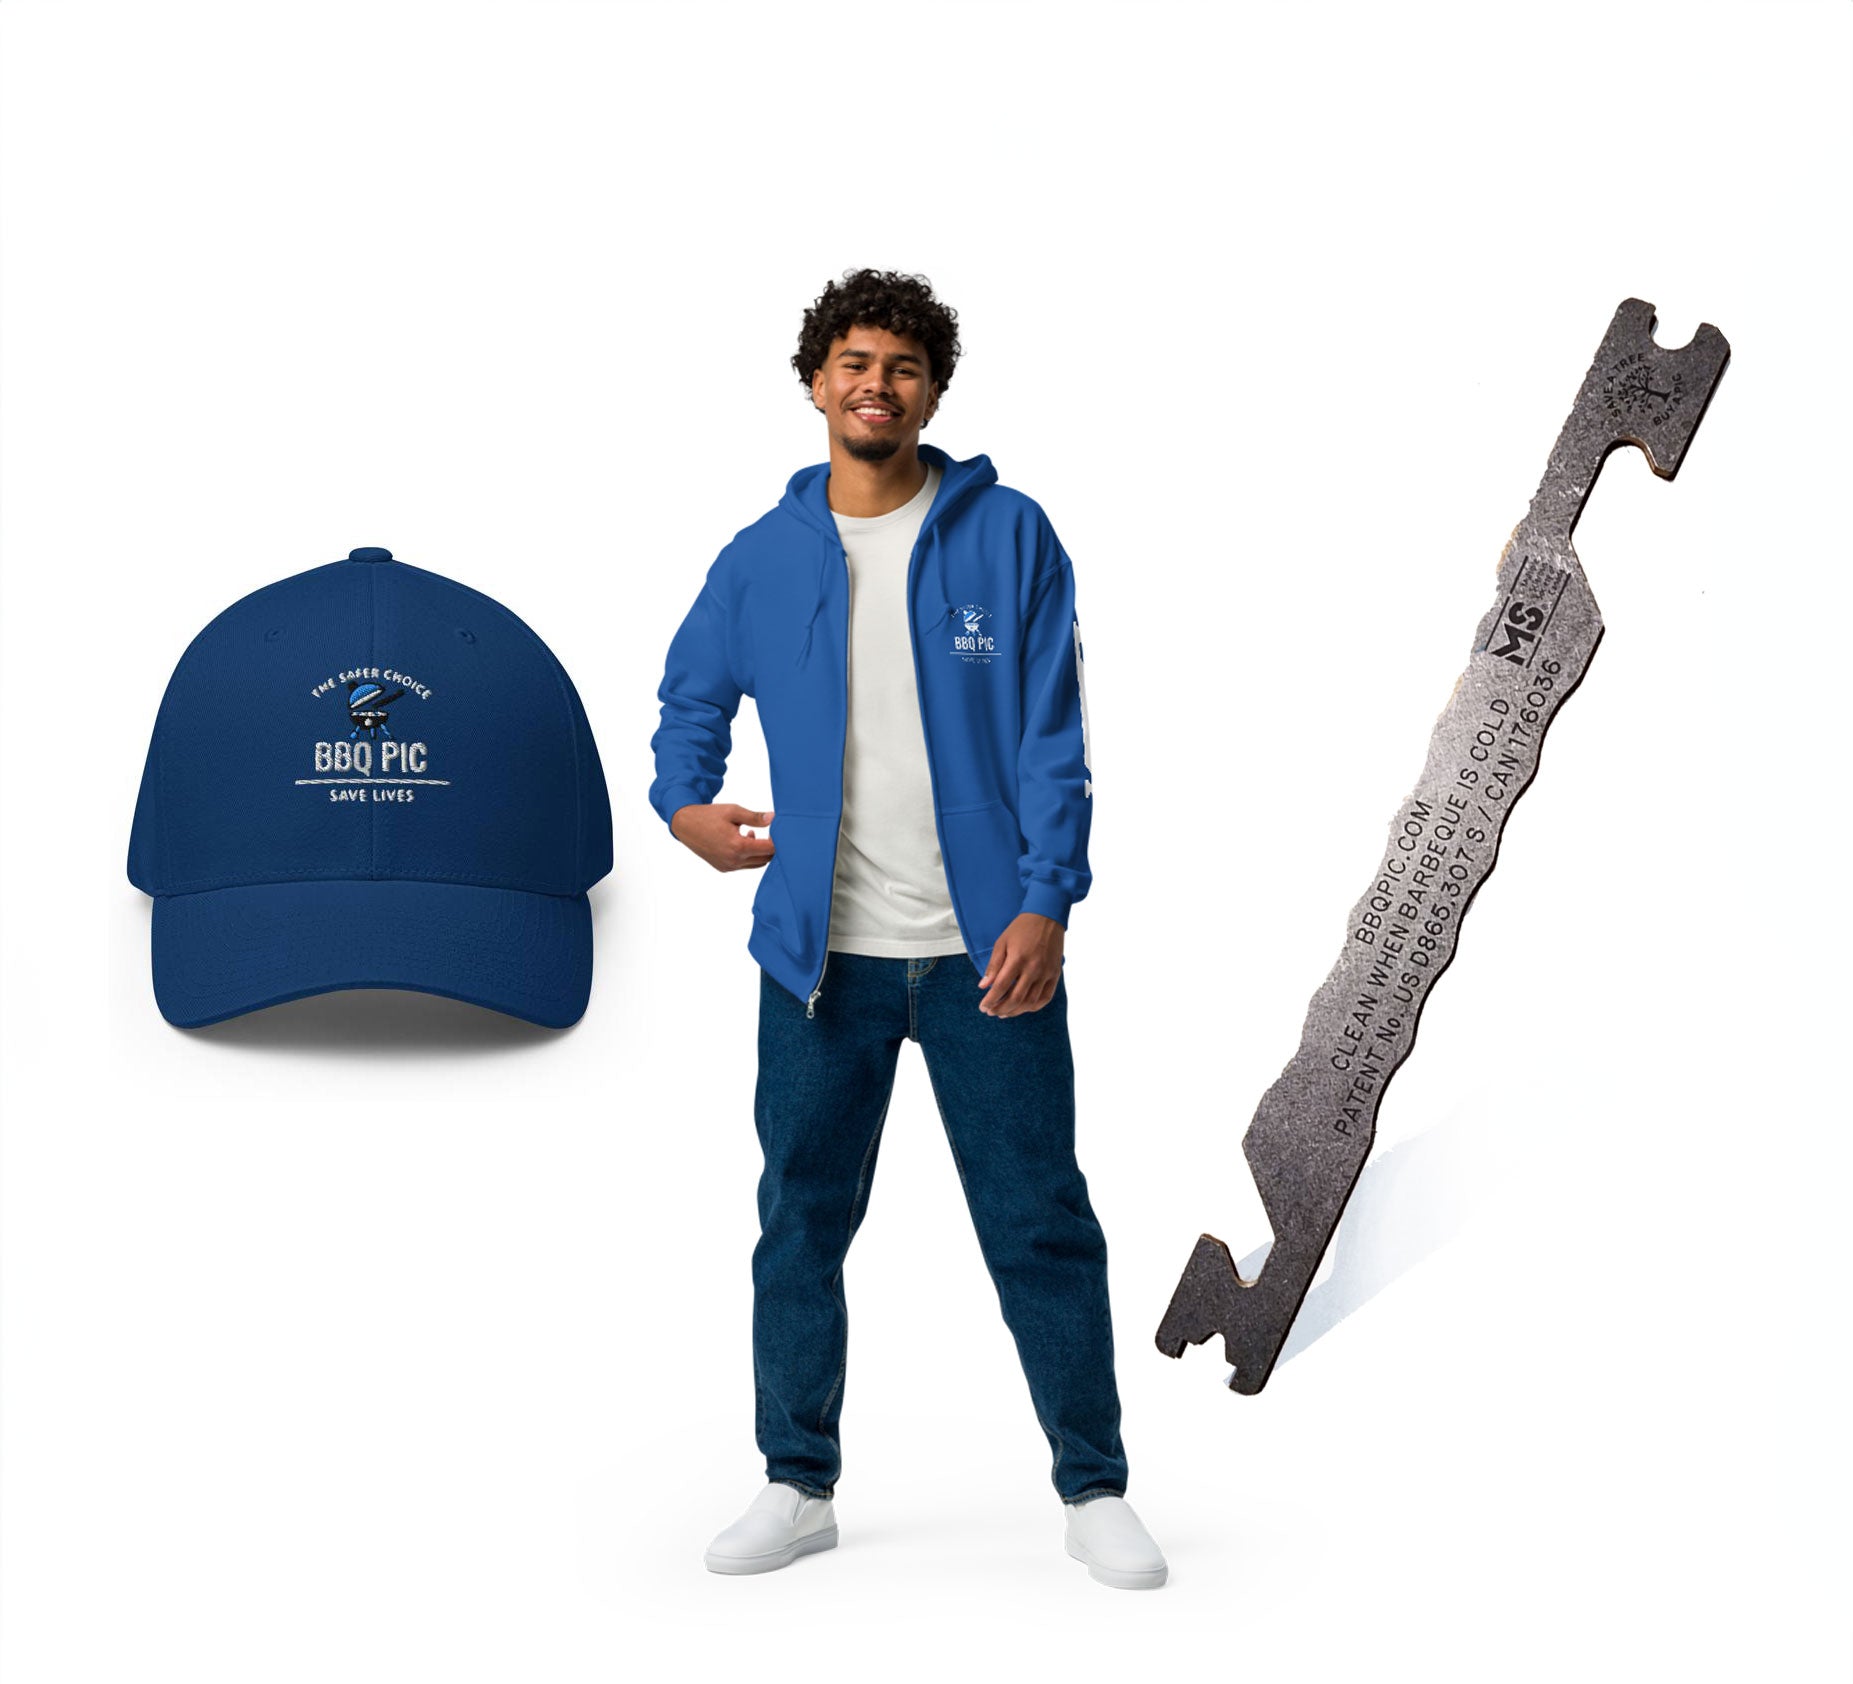 Image of the BBQ Pic Bundle where you save money which includes a BBQ Pic hat, Hoody and BBQ Pic Grill Scraper. Hoody is Blue.